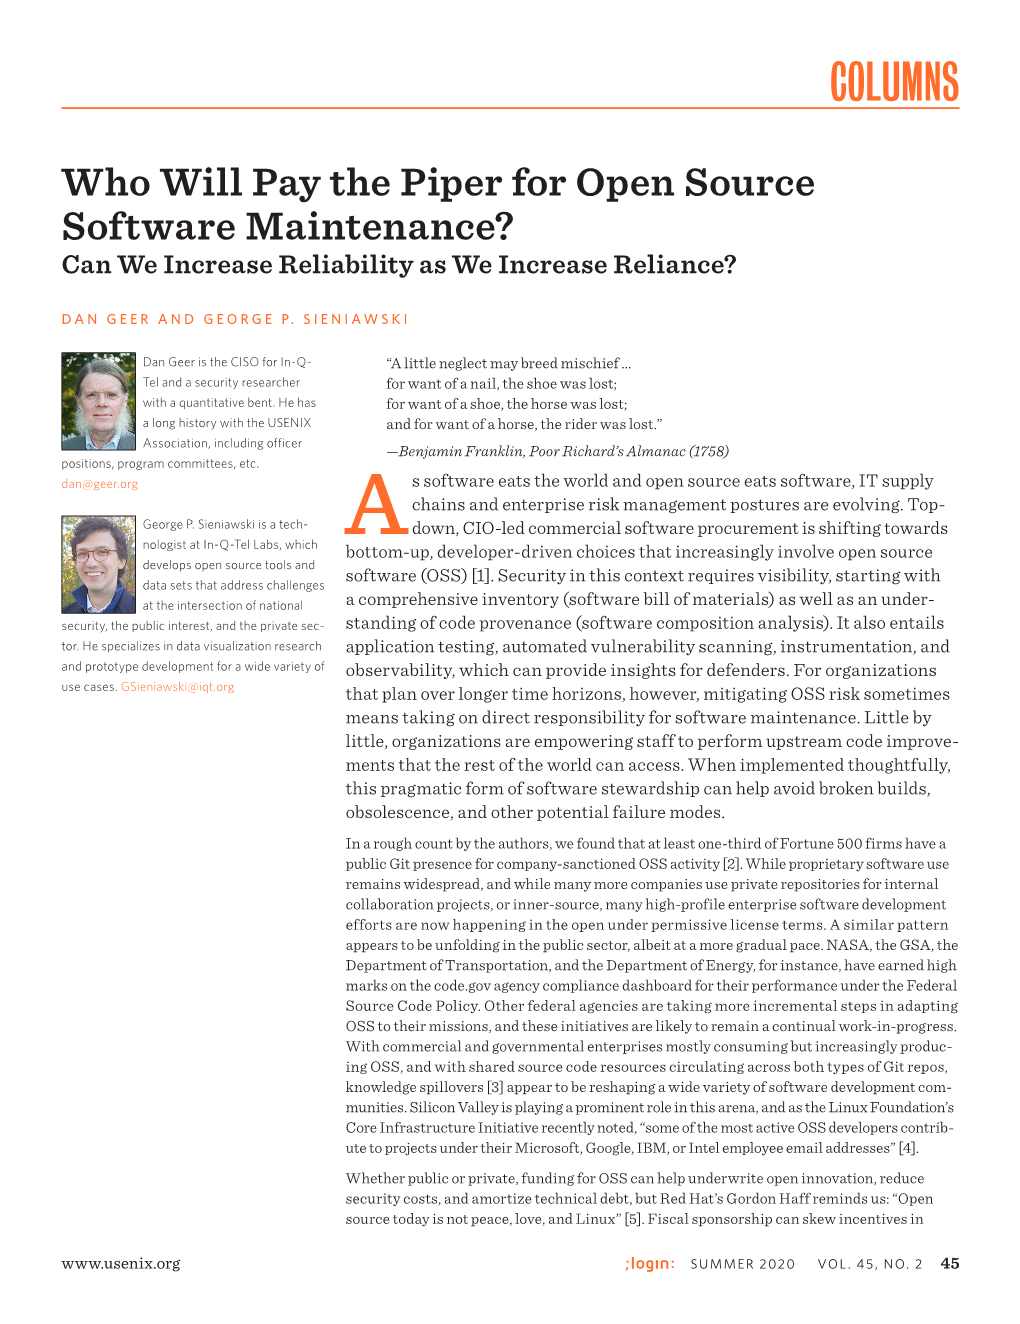 Who Will Pay the Piper for Open Source Software Maintenance? Can We Increase Reliability As We Increase Reliance?